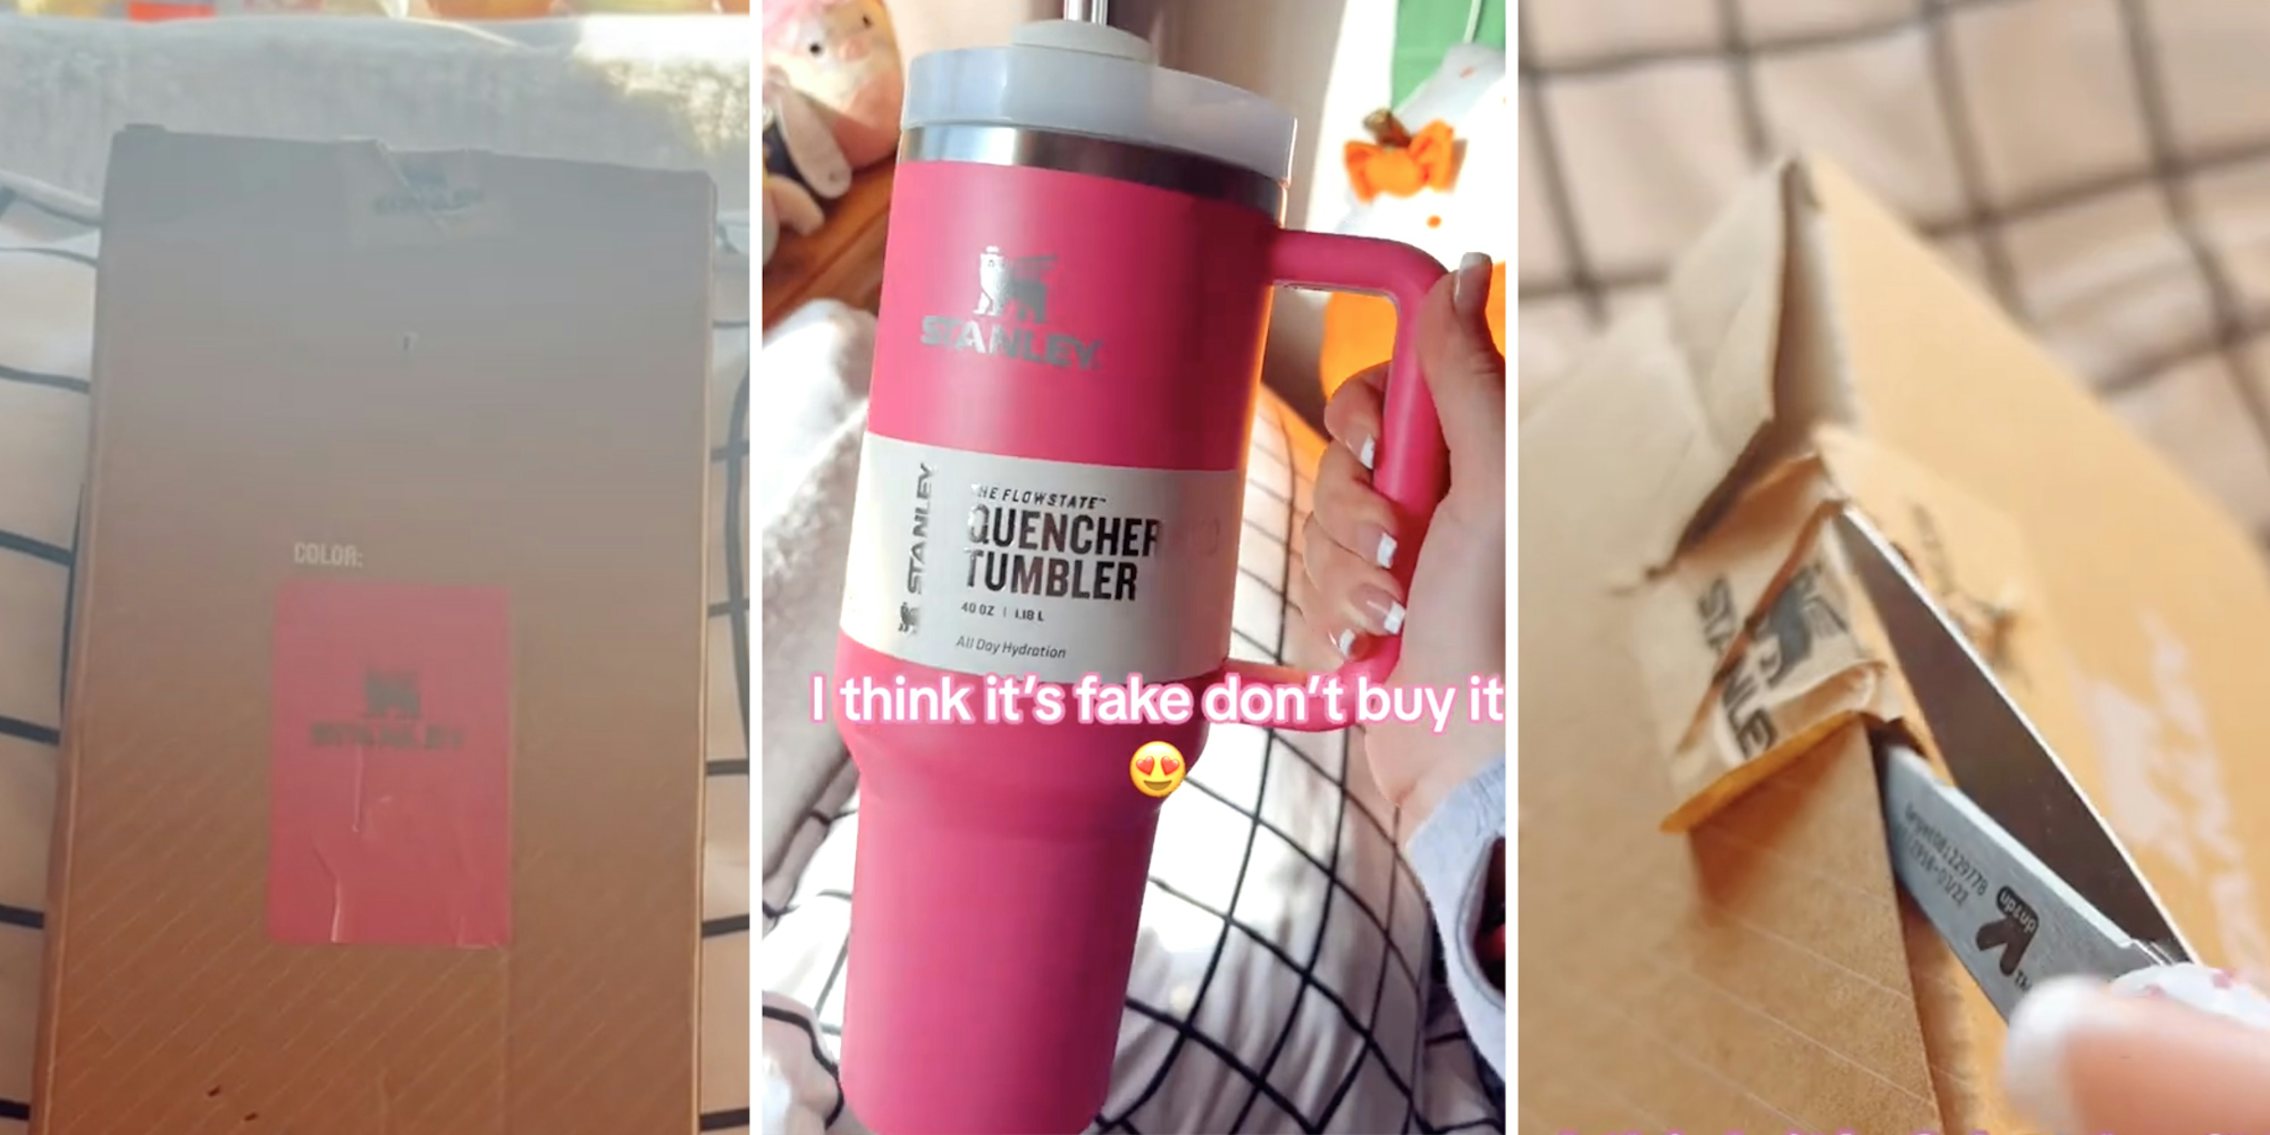 Straight Talk: How to spot fake ads for Stanley travel cups